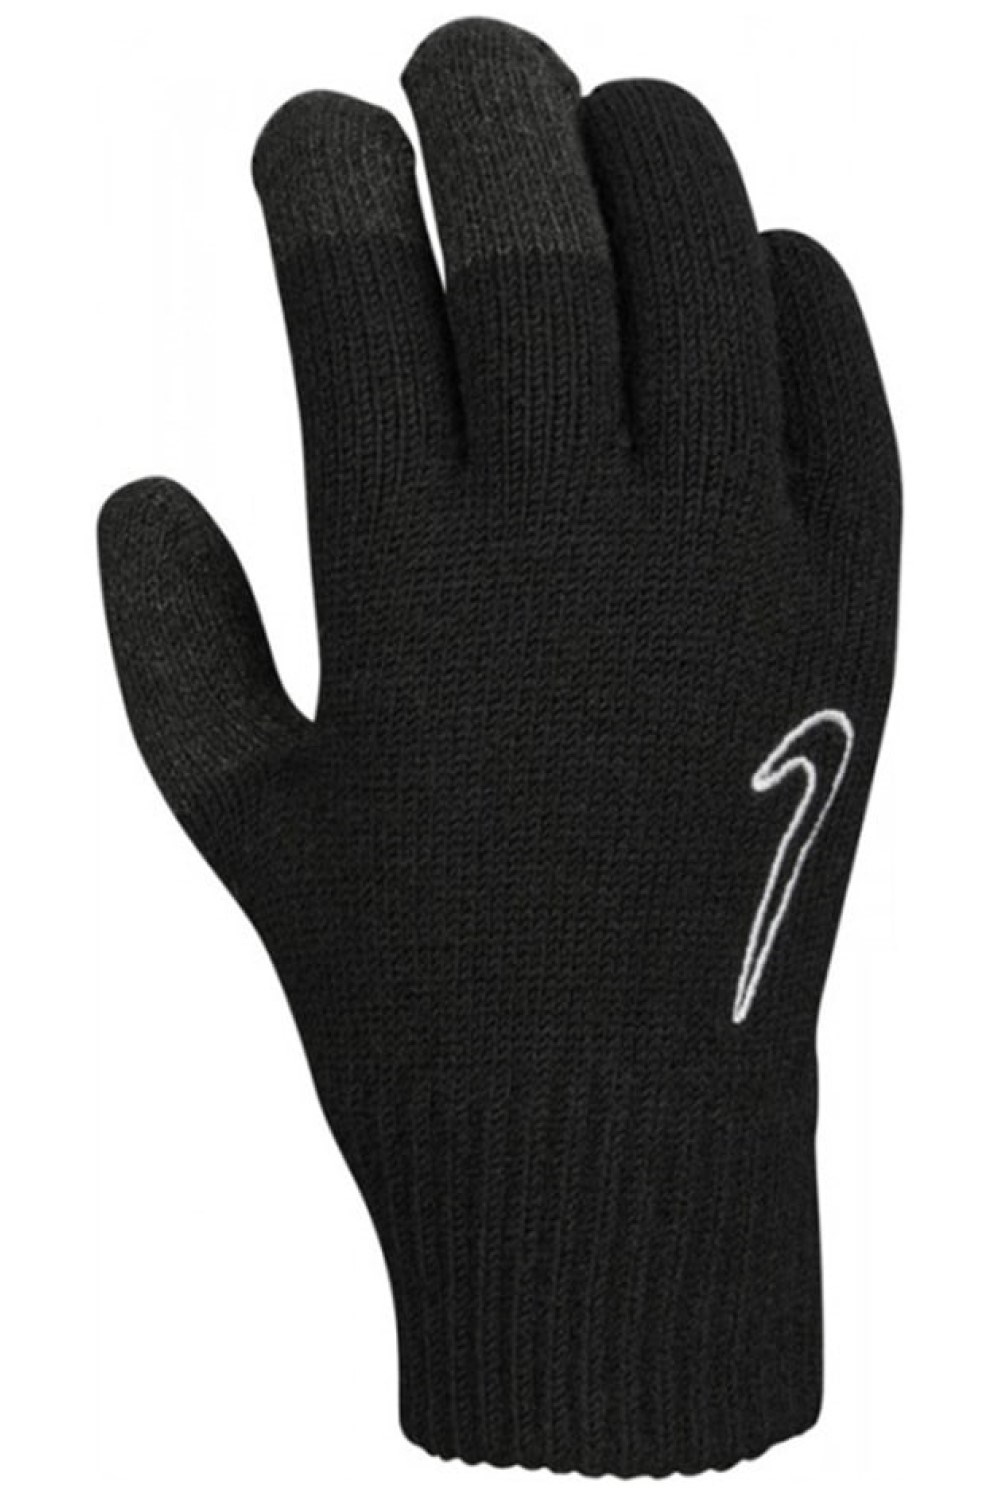 2. 0 Knitted Grip Gloves -